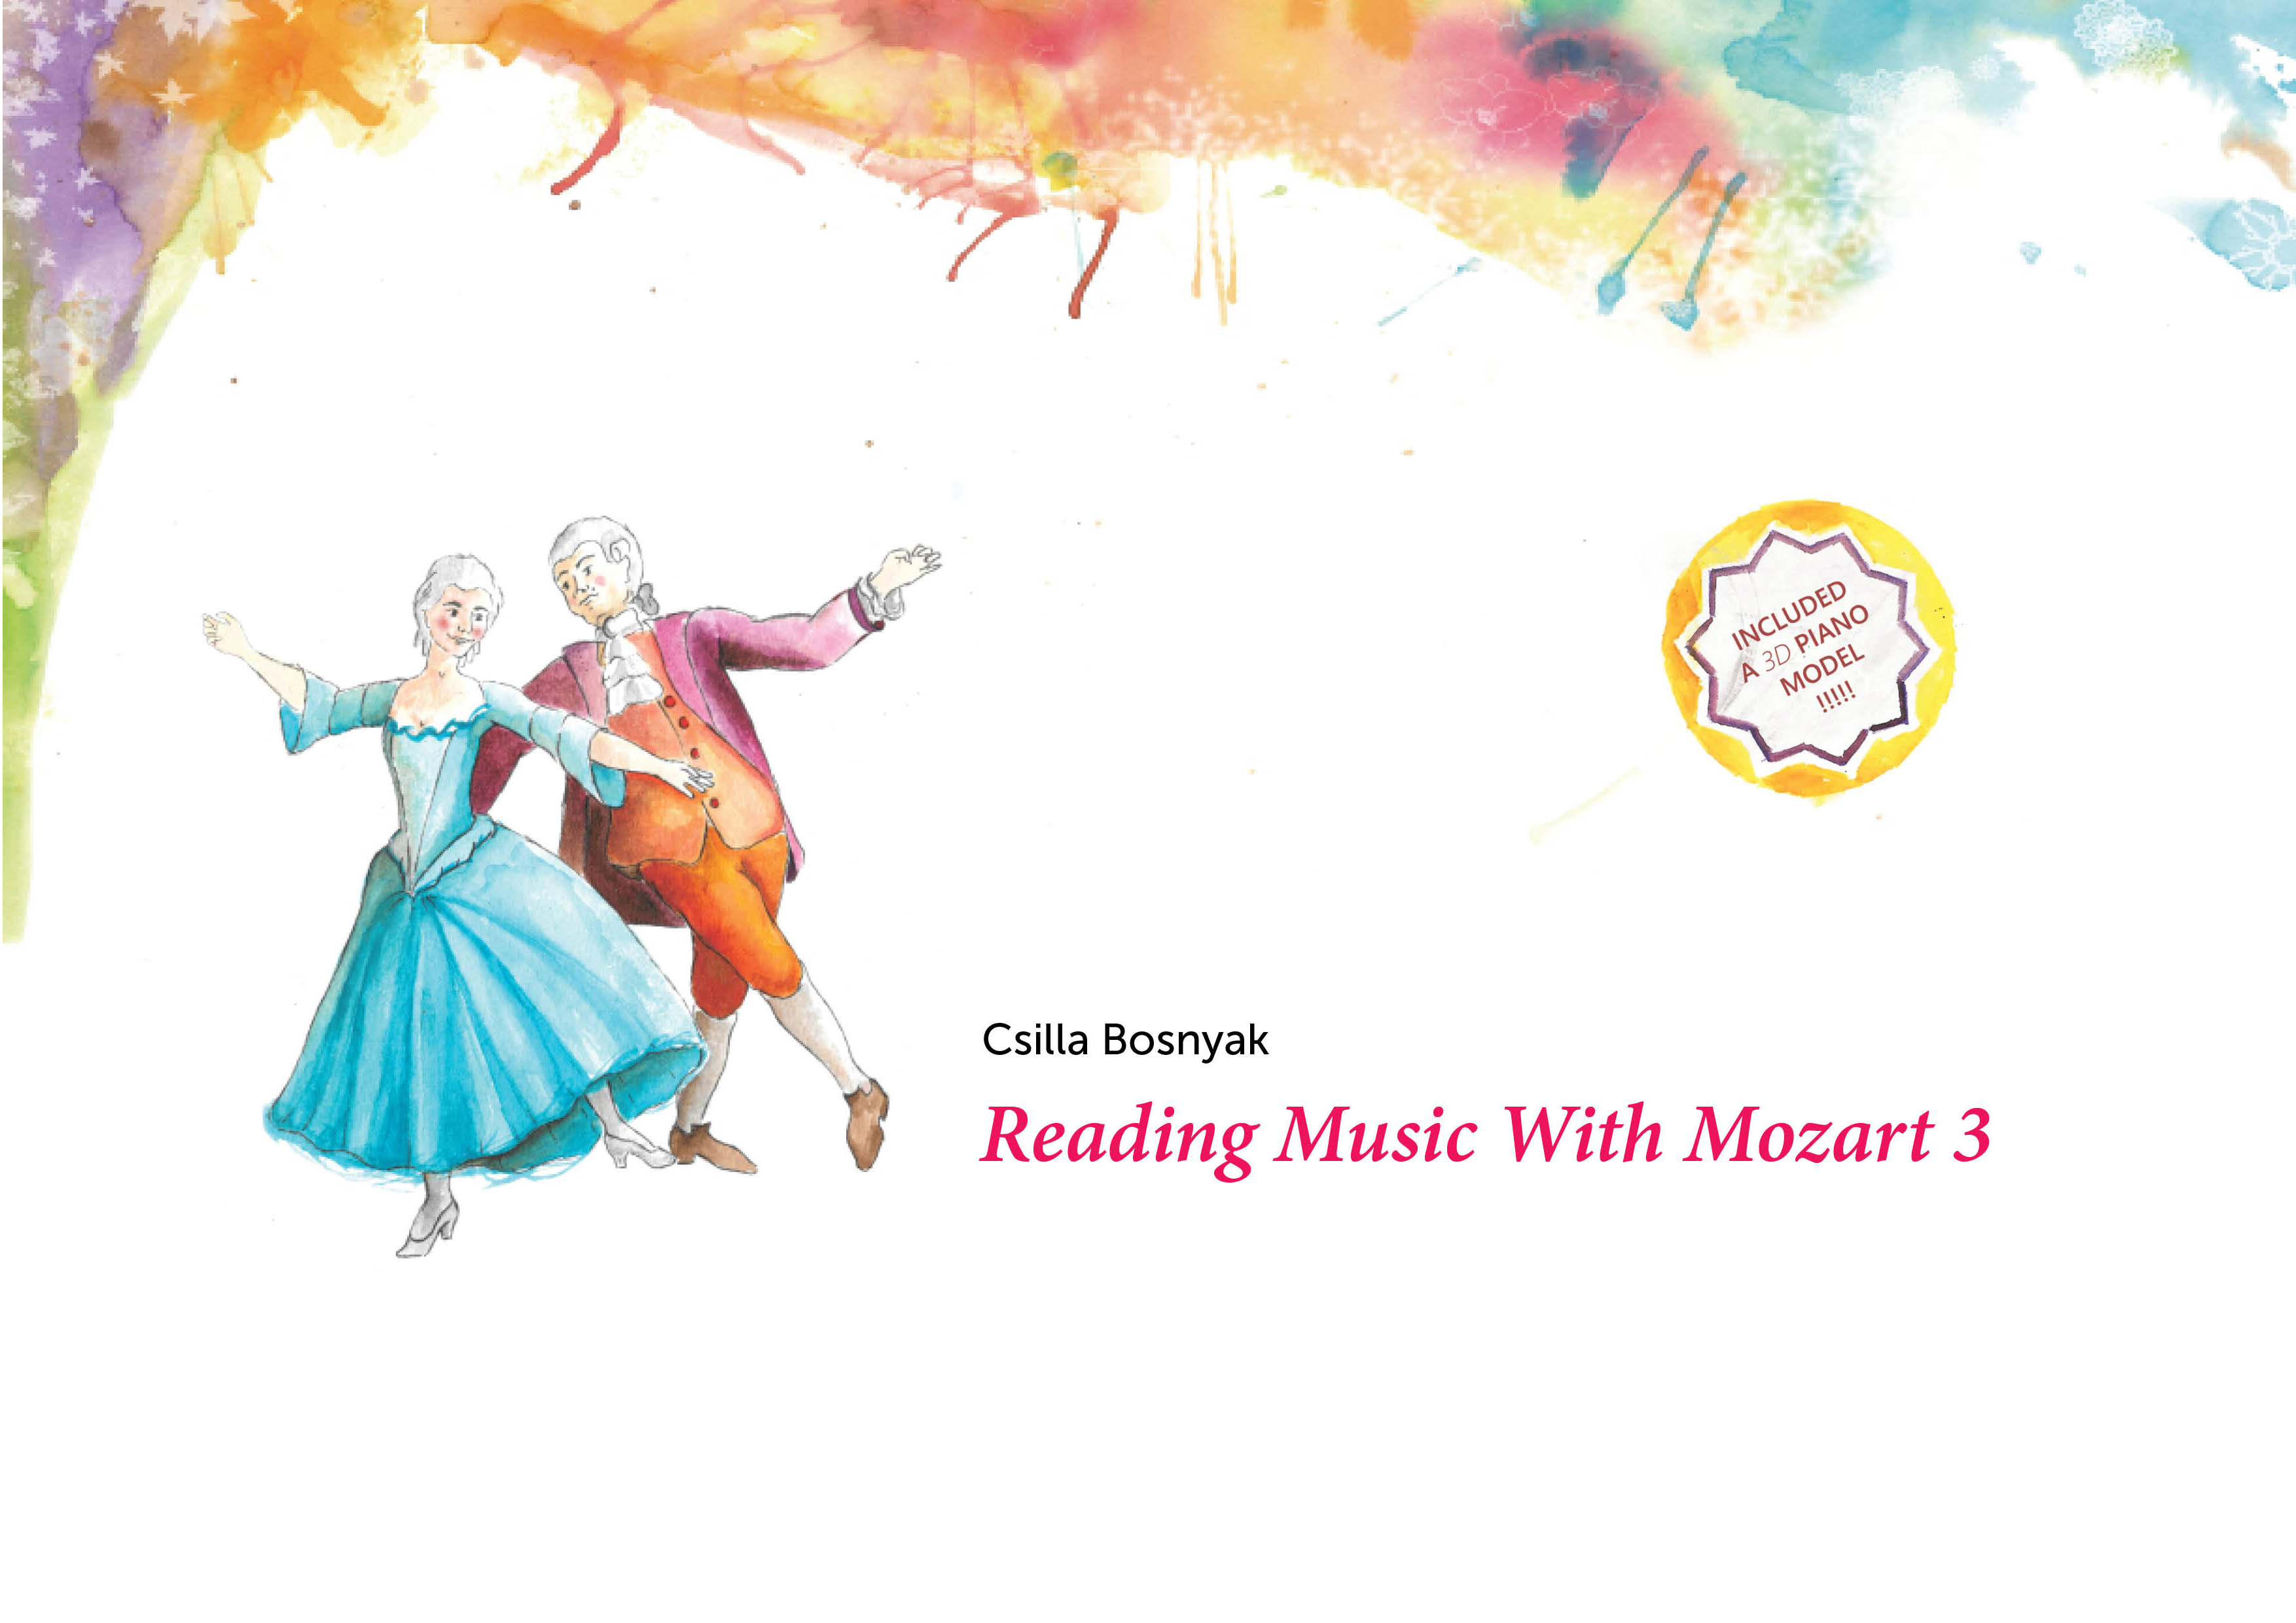 Reading Music With Mozart 3